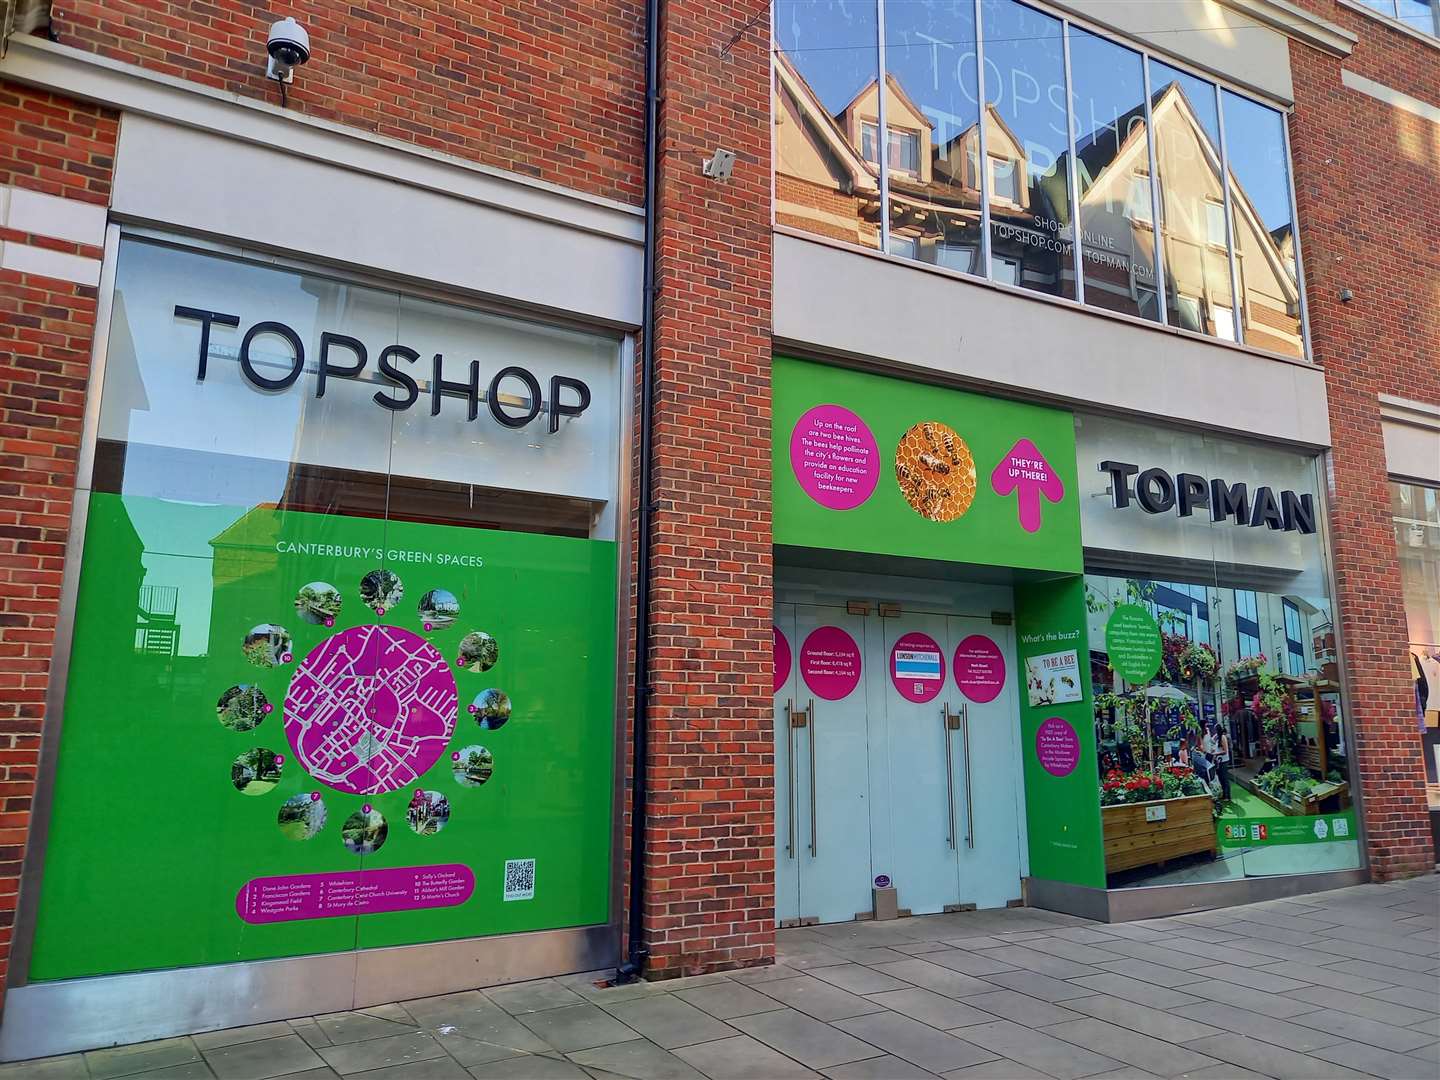 The former Topshop is set to become the council's new main offices